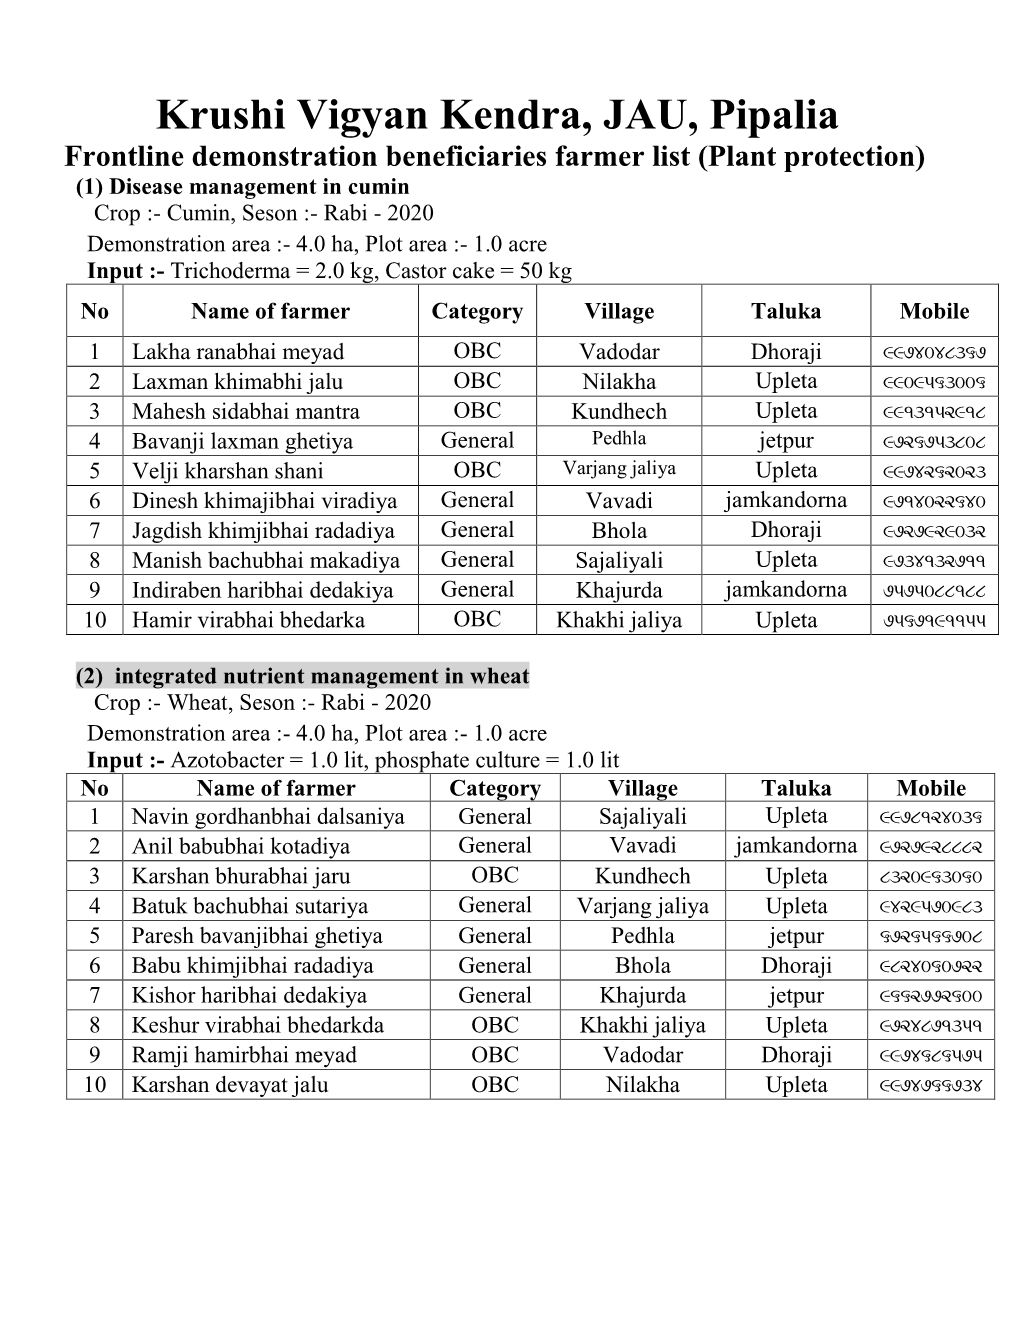 Details of Beneficiaries of Frontline Demonstrations